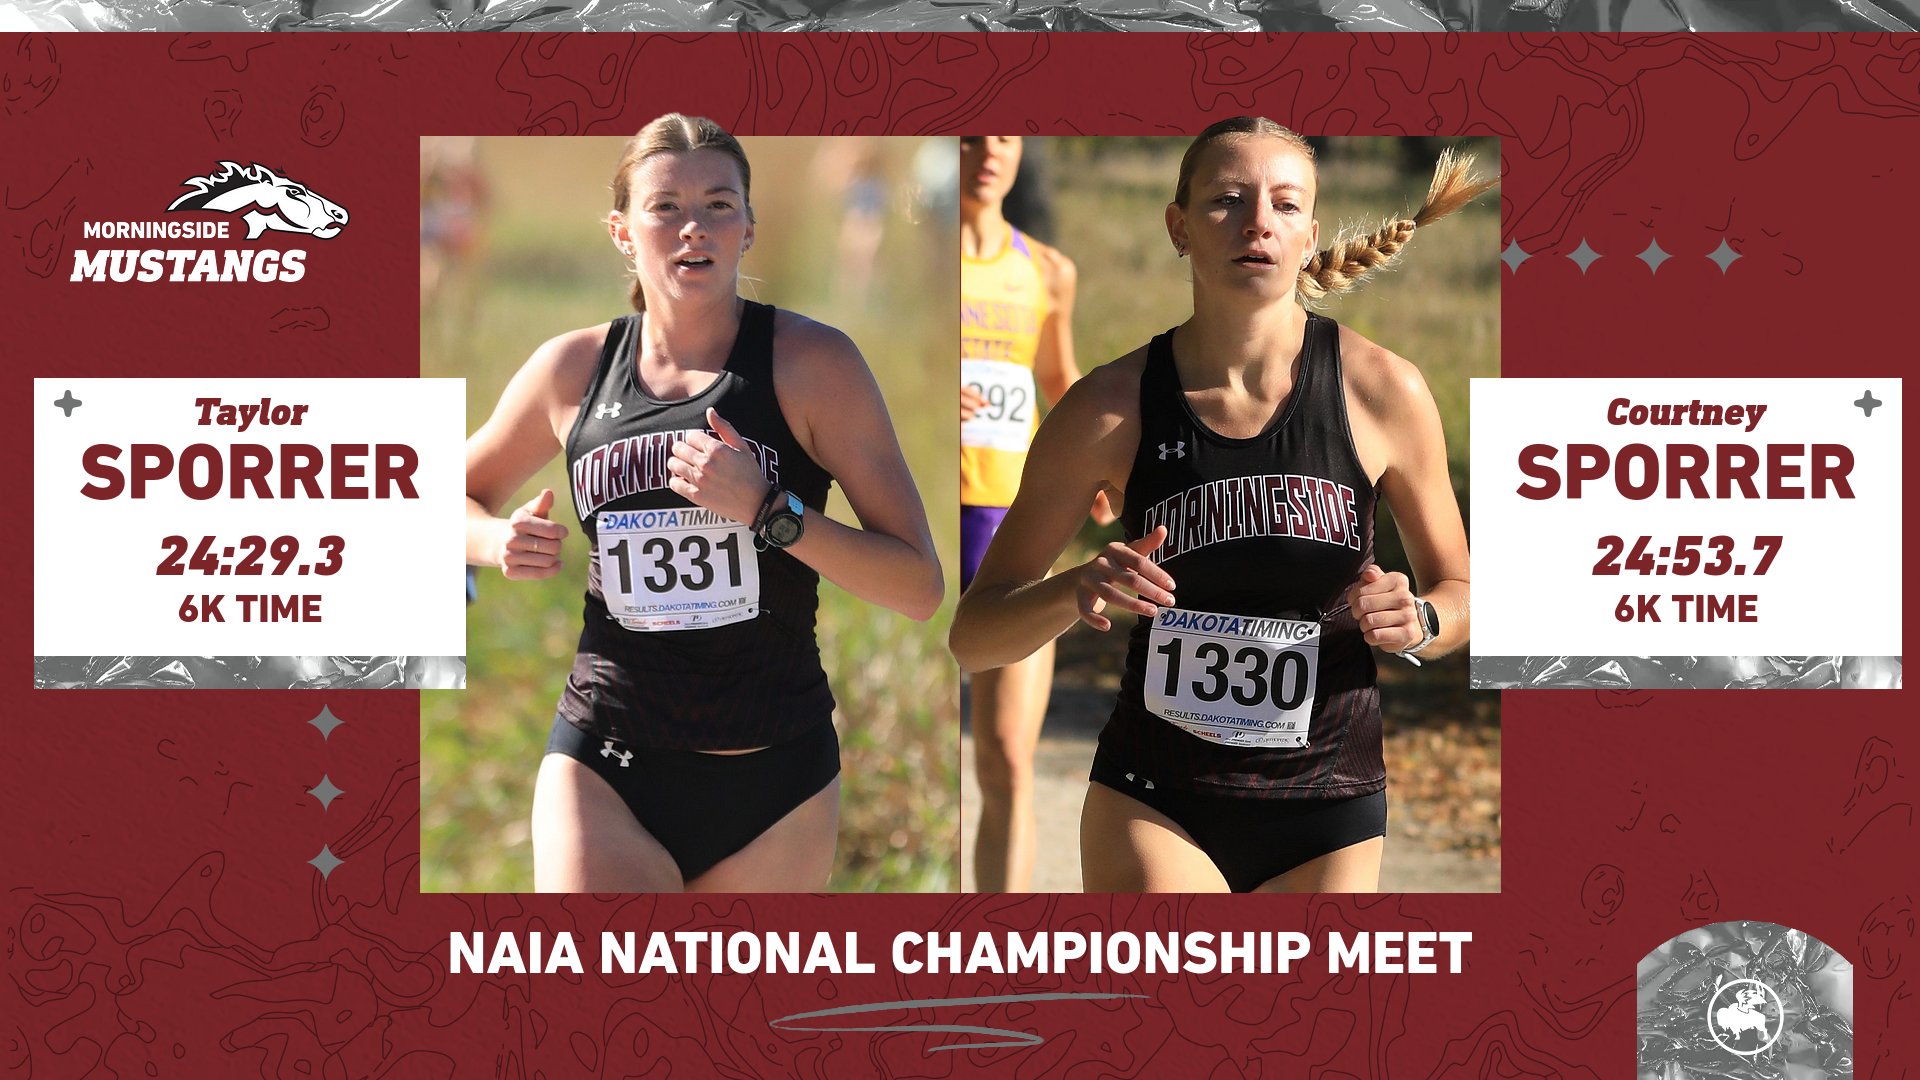 Taylor Sporrer and Courtney Sporrer run at NAIA National Championship Meet